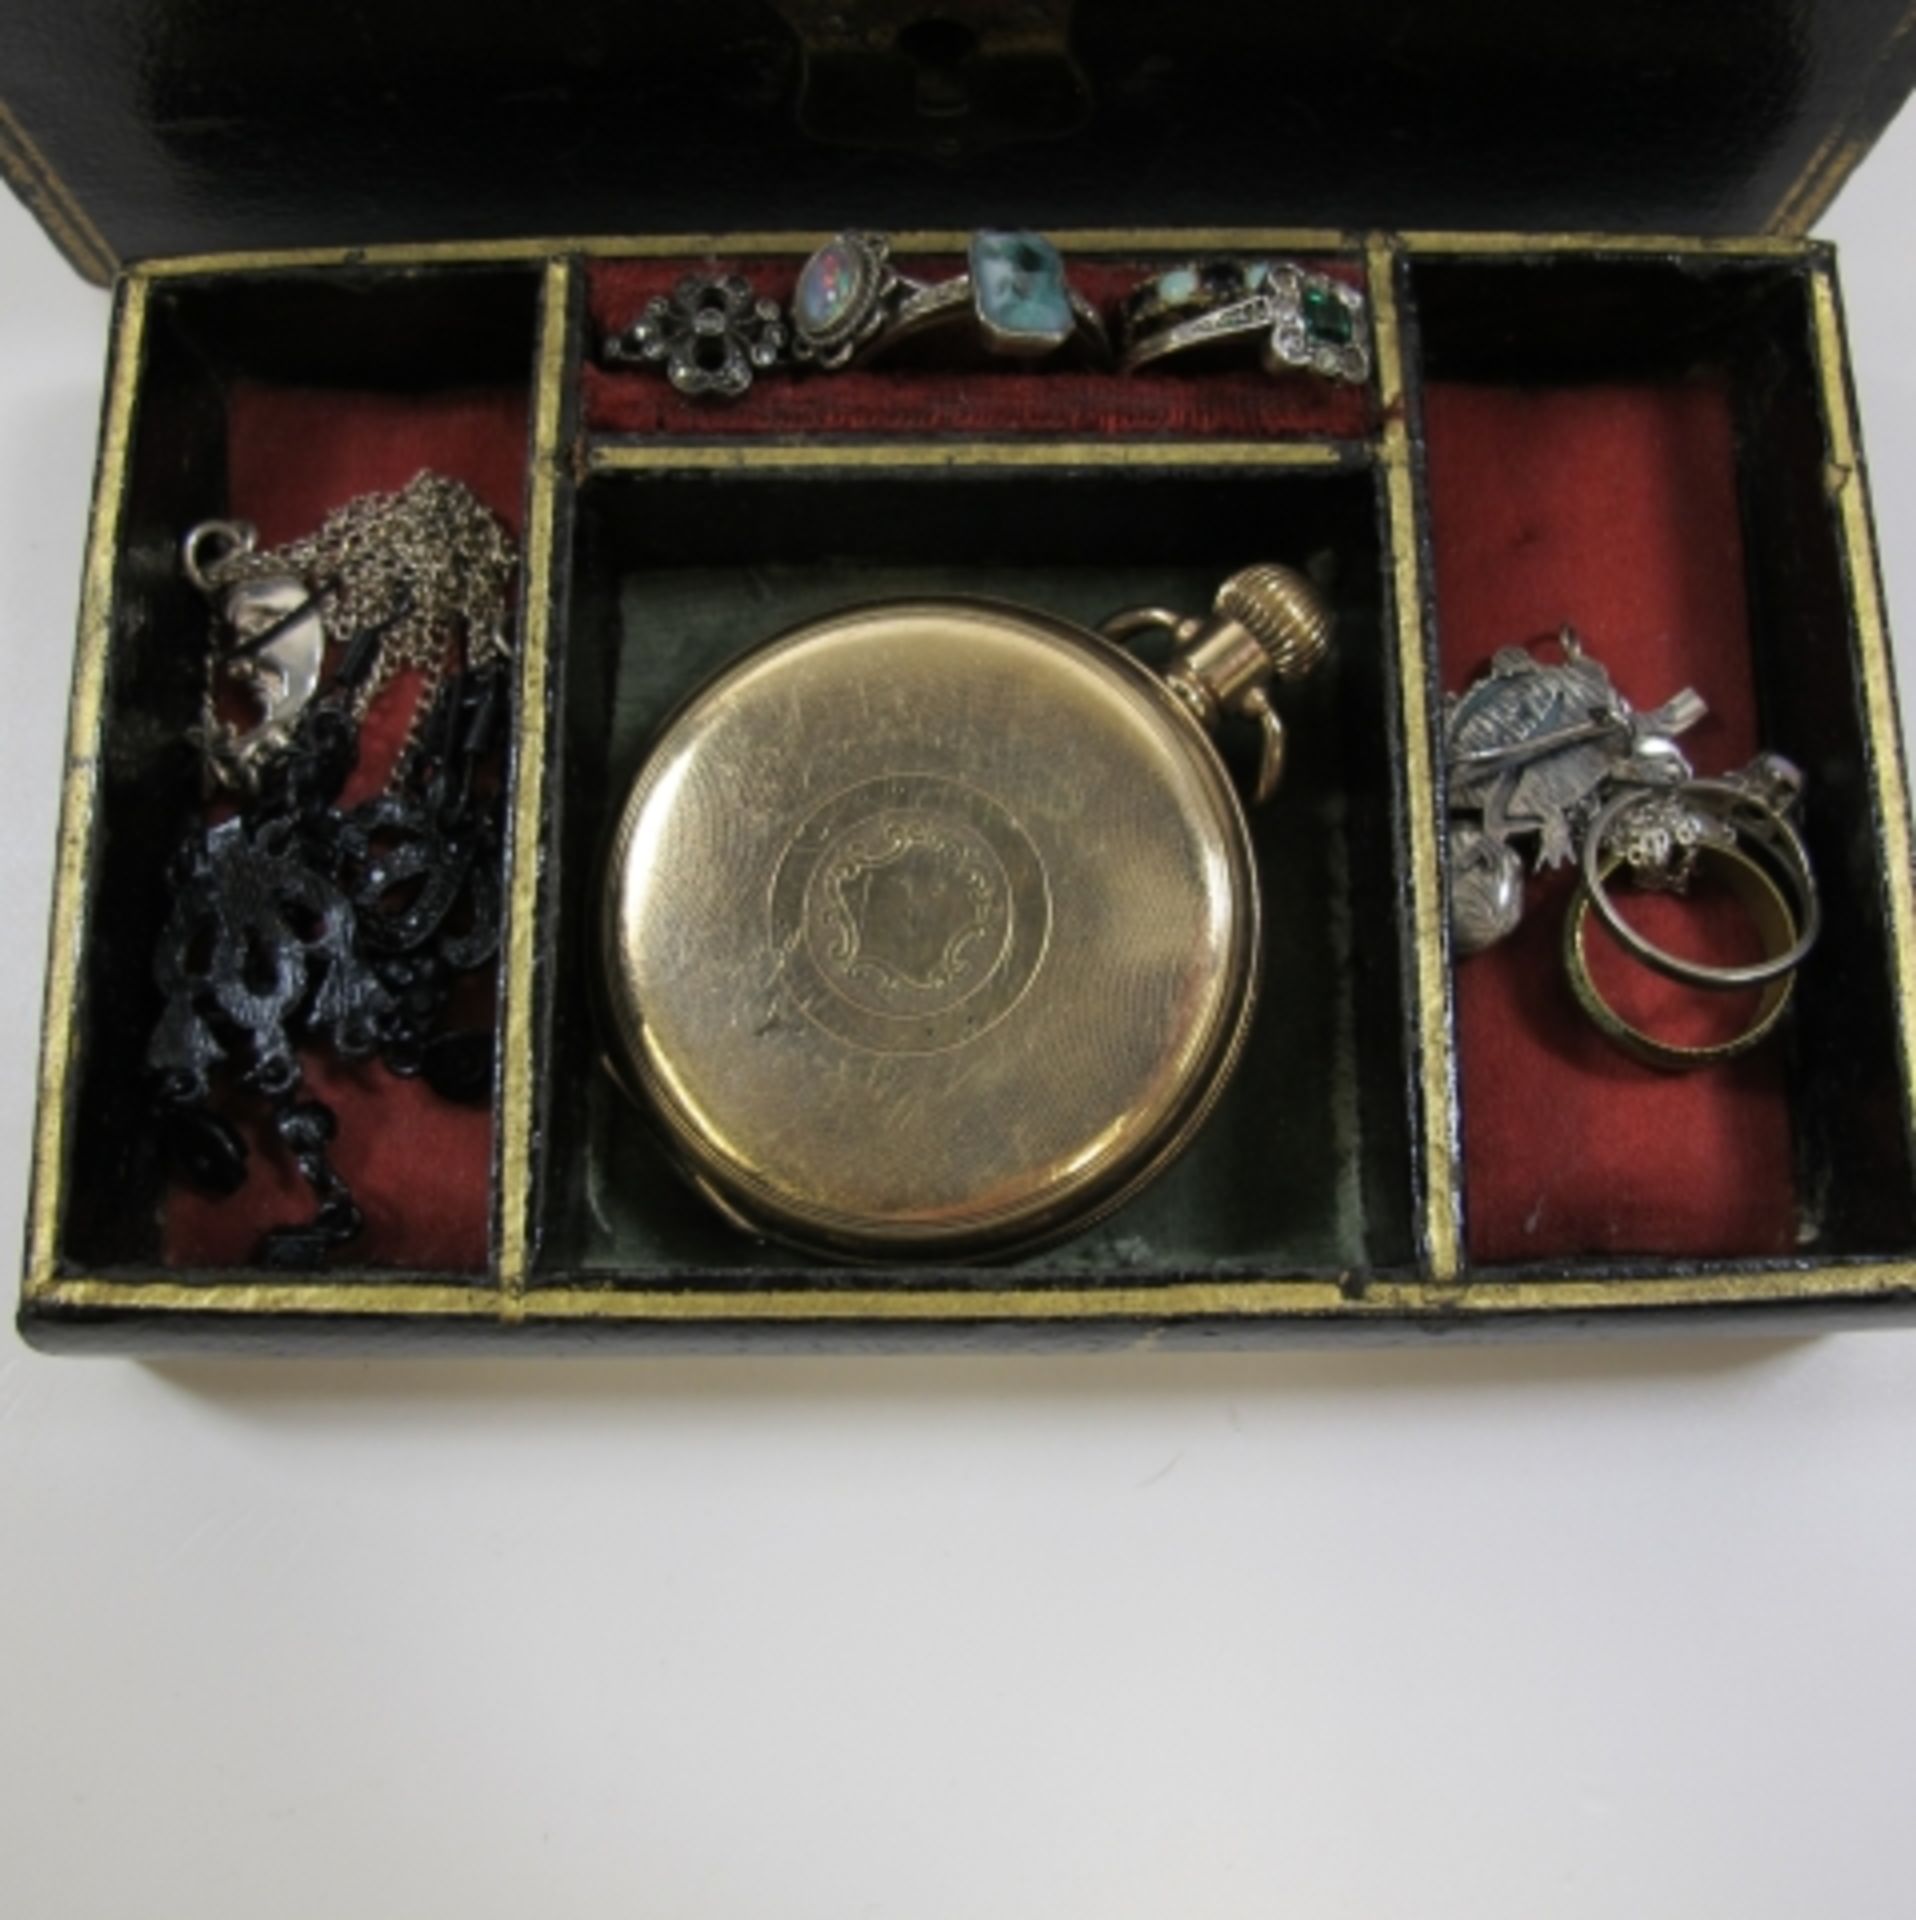 A Small Jewellery Box And Contents Including Some Precious Metal (est £50-£70) - Image 3 of 4